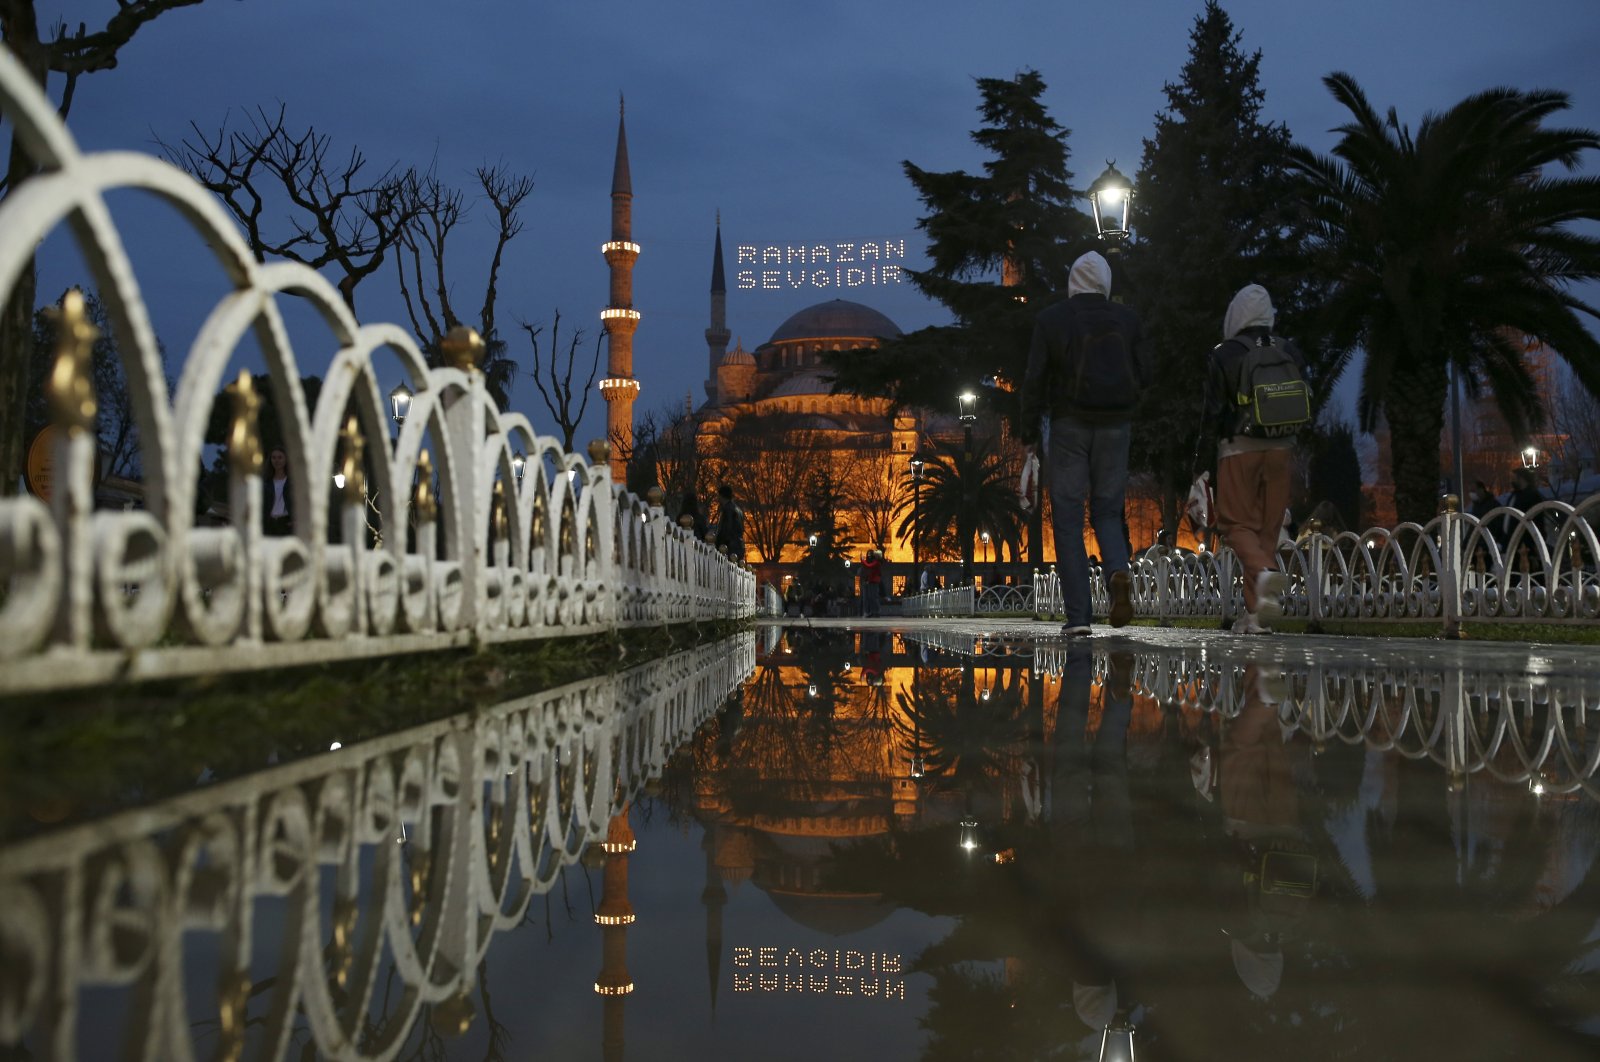 The iconic Sultan Ahmet Mosque, better known as the Blue Mosque, decorated with lights and a slogan reading “Ramadan is love,” in the historic Sultan Ahmet district of Istanbul, Turkey, Tuesday, April 13, 2021. (AP Photo)